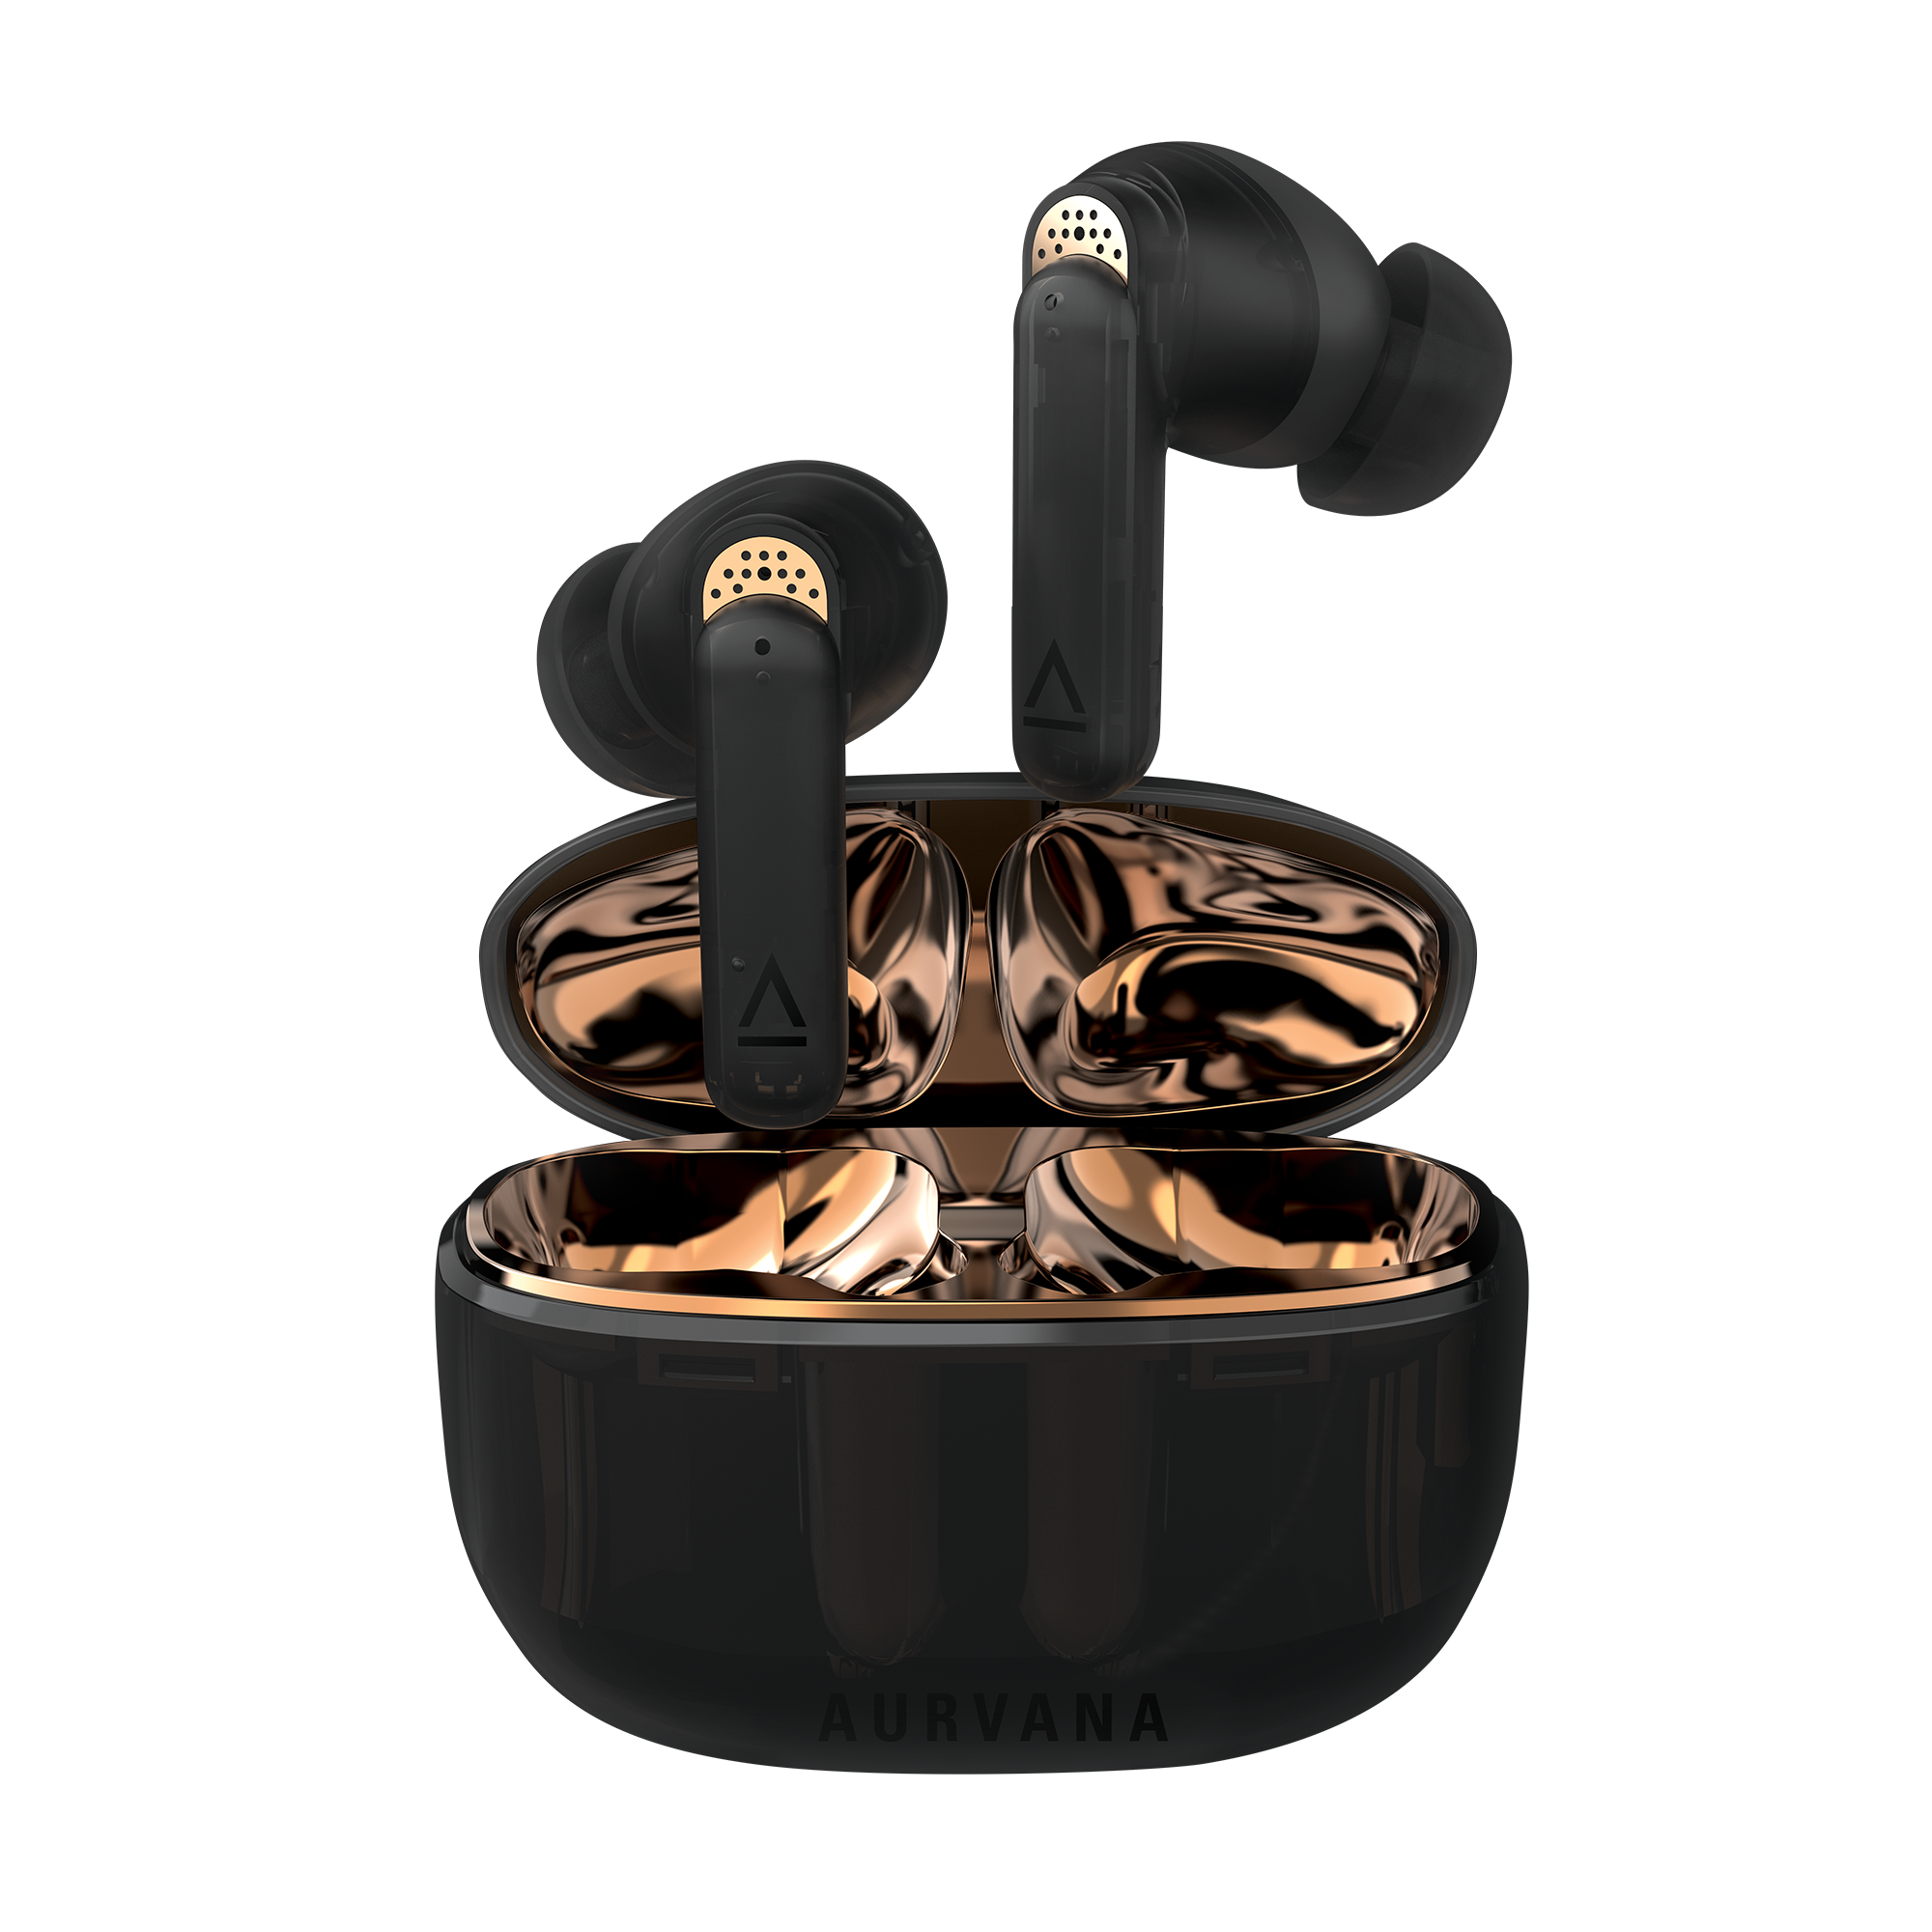 Creative Aurvana Ace 2 True Wireless In Ears With Bluetooth® Le Audio Aptxtm Lossless And 